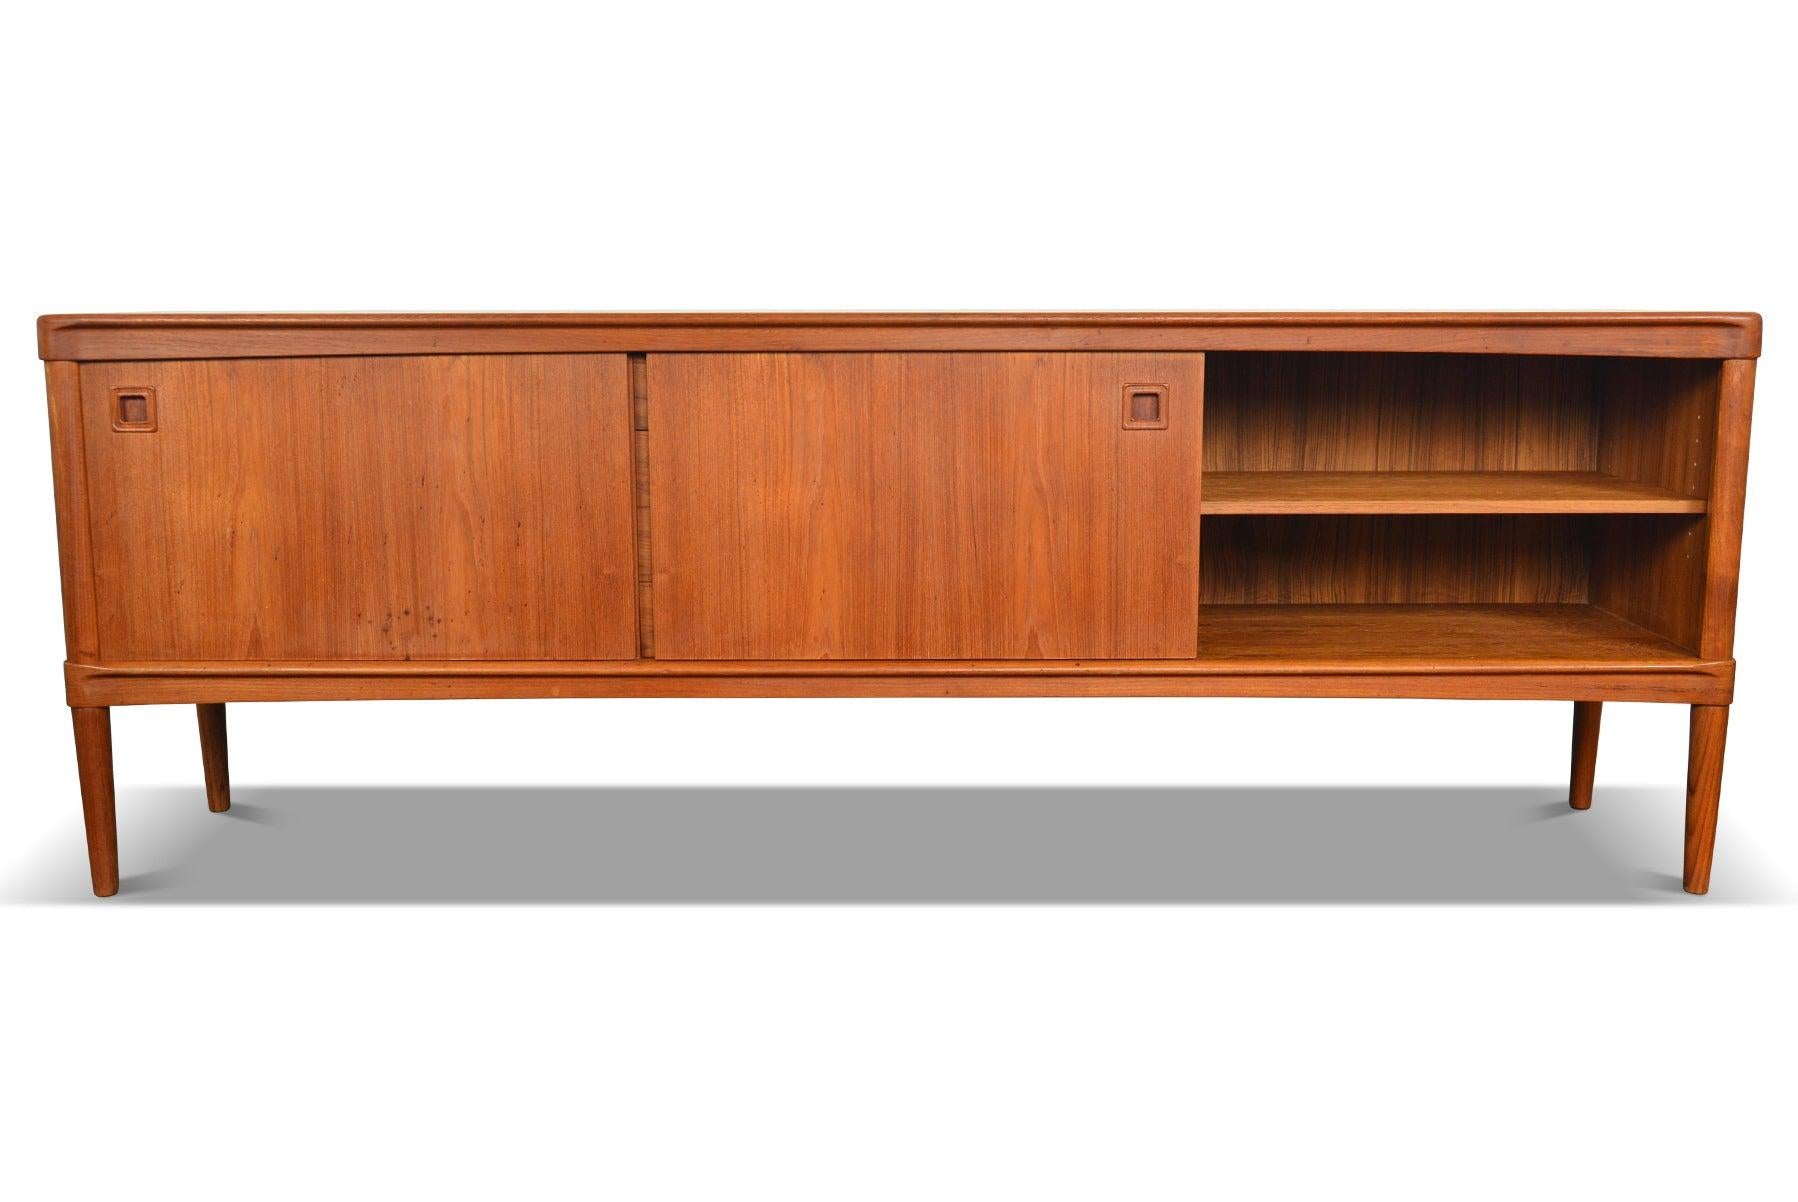 20th Century Square Pull Teak Credenza by H.W. Klein #4 For Sale